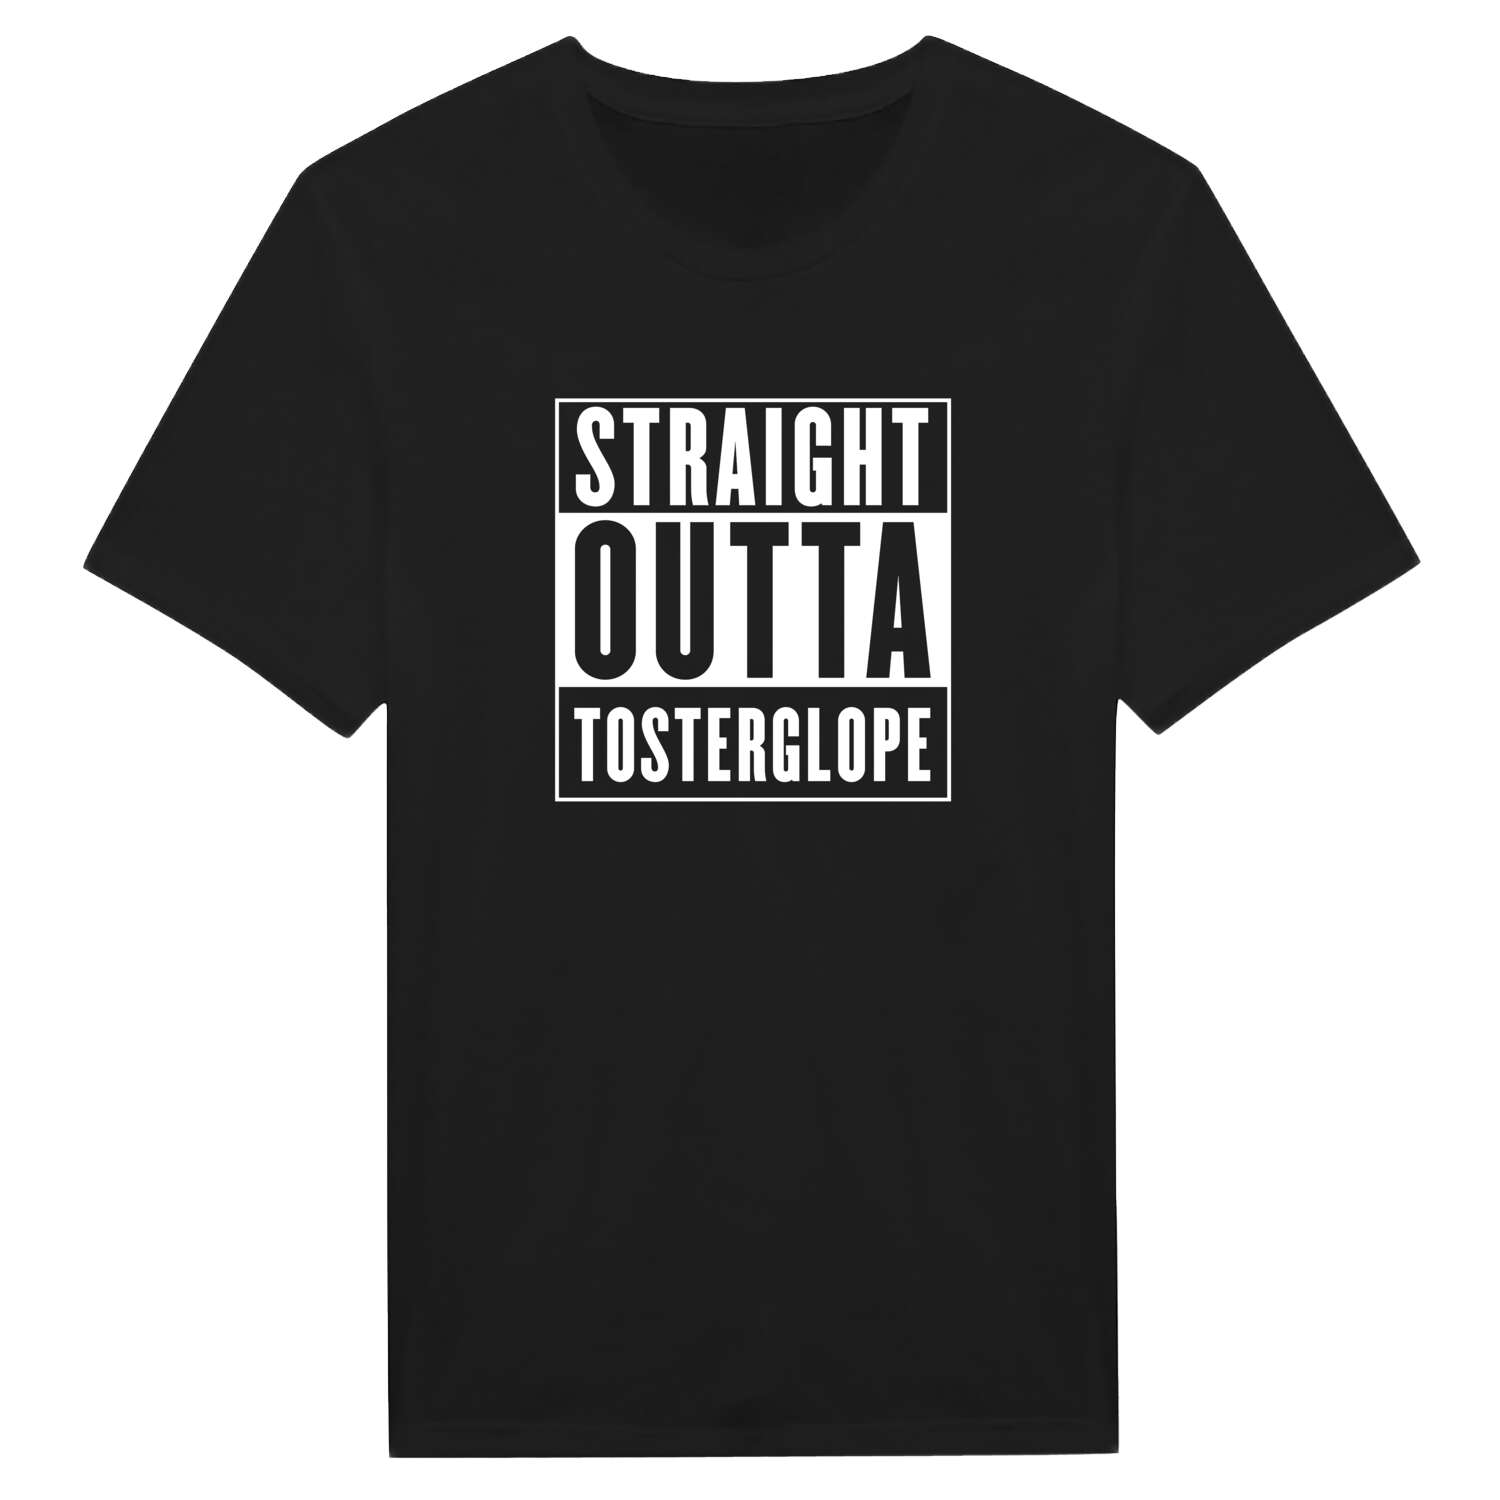 Tosterglope T-Shirt »Straight Outta«